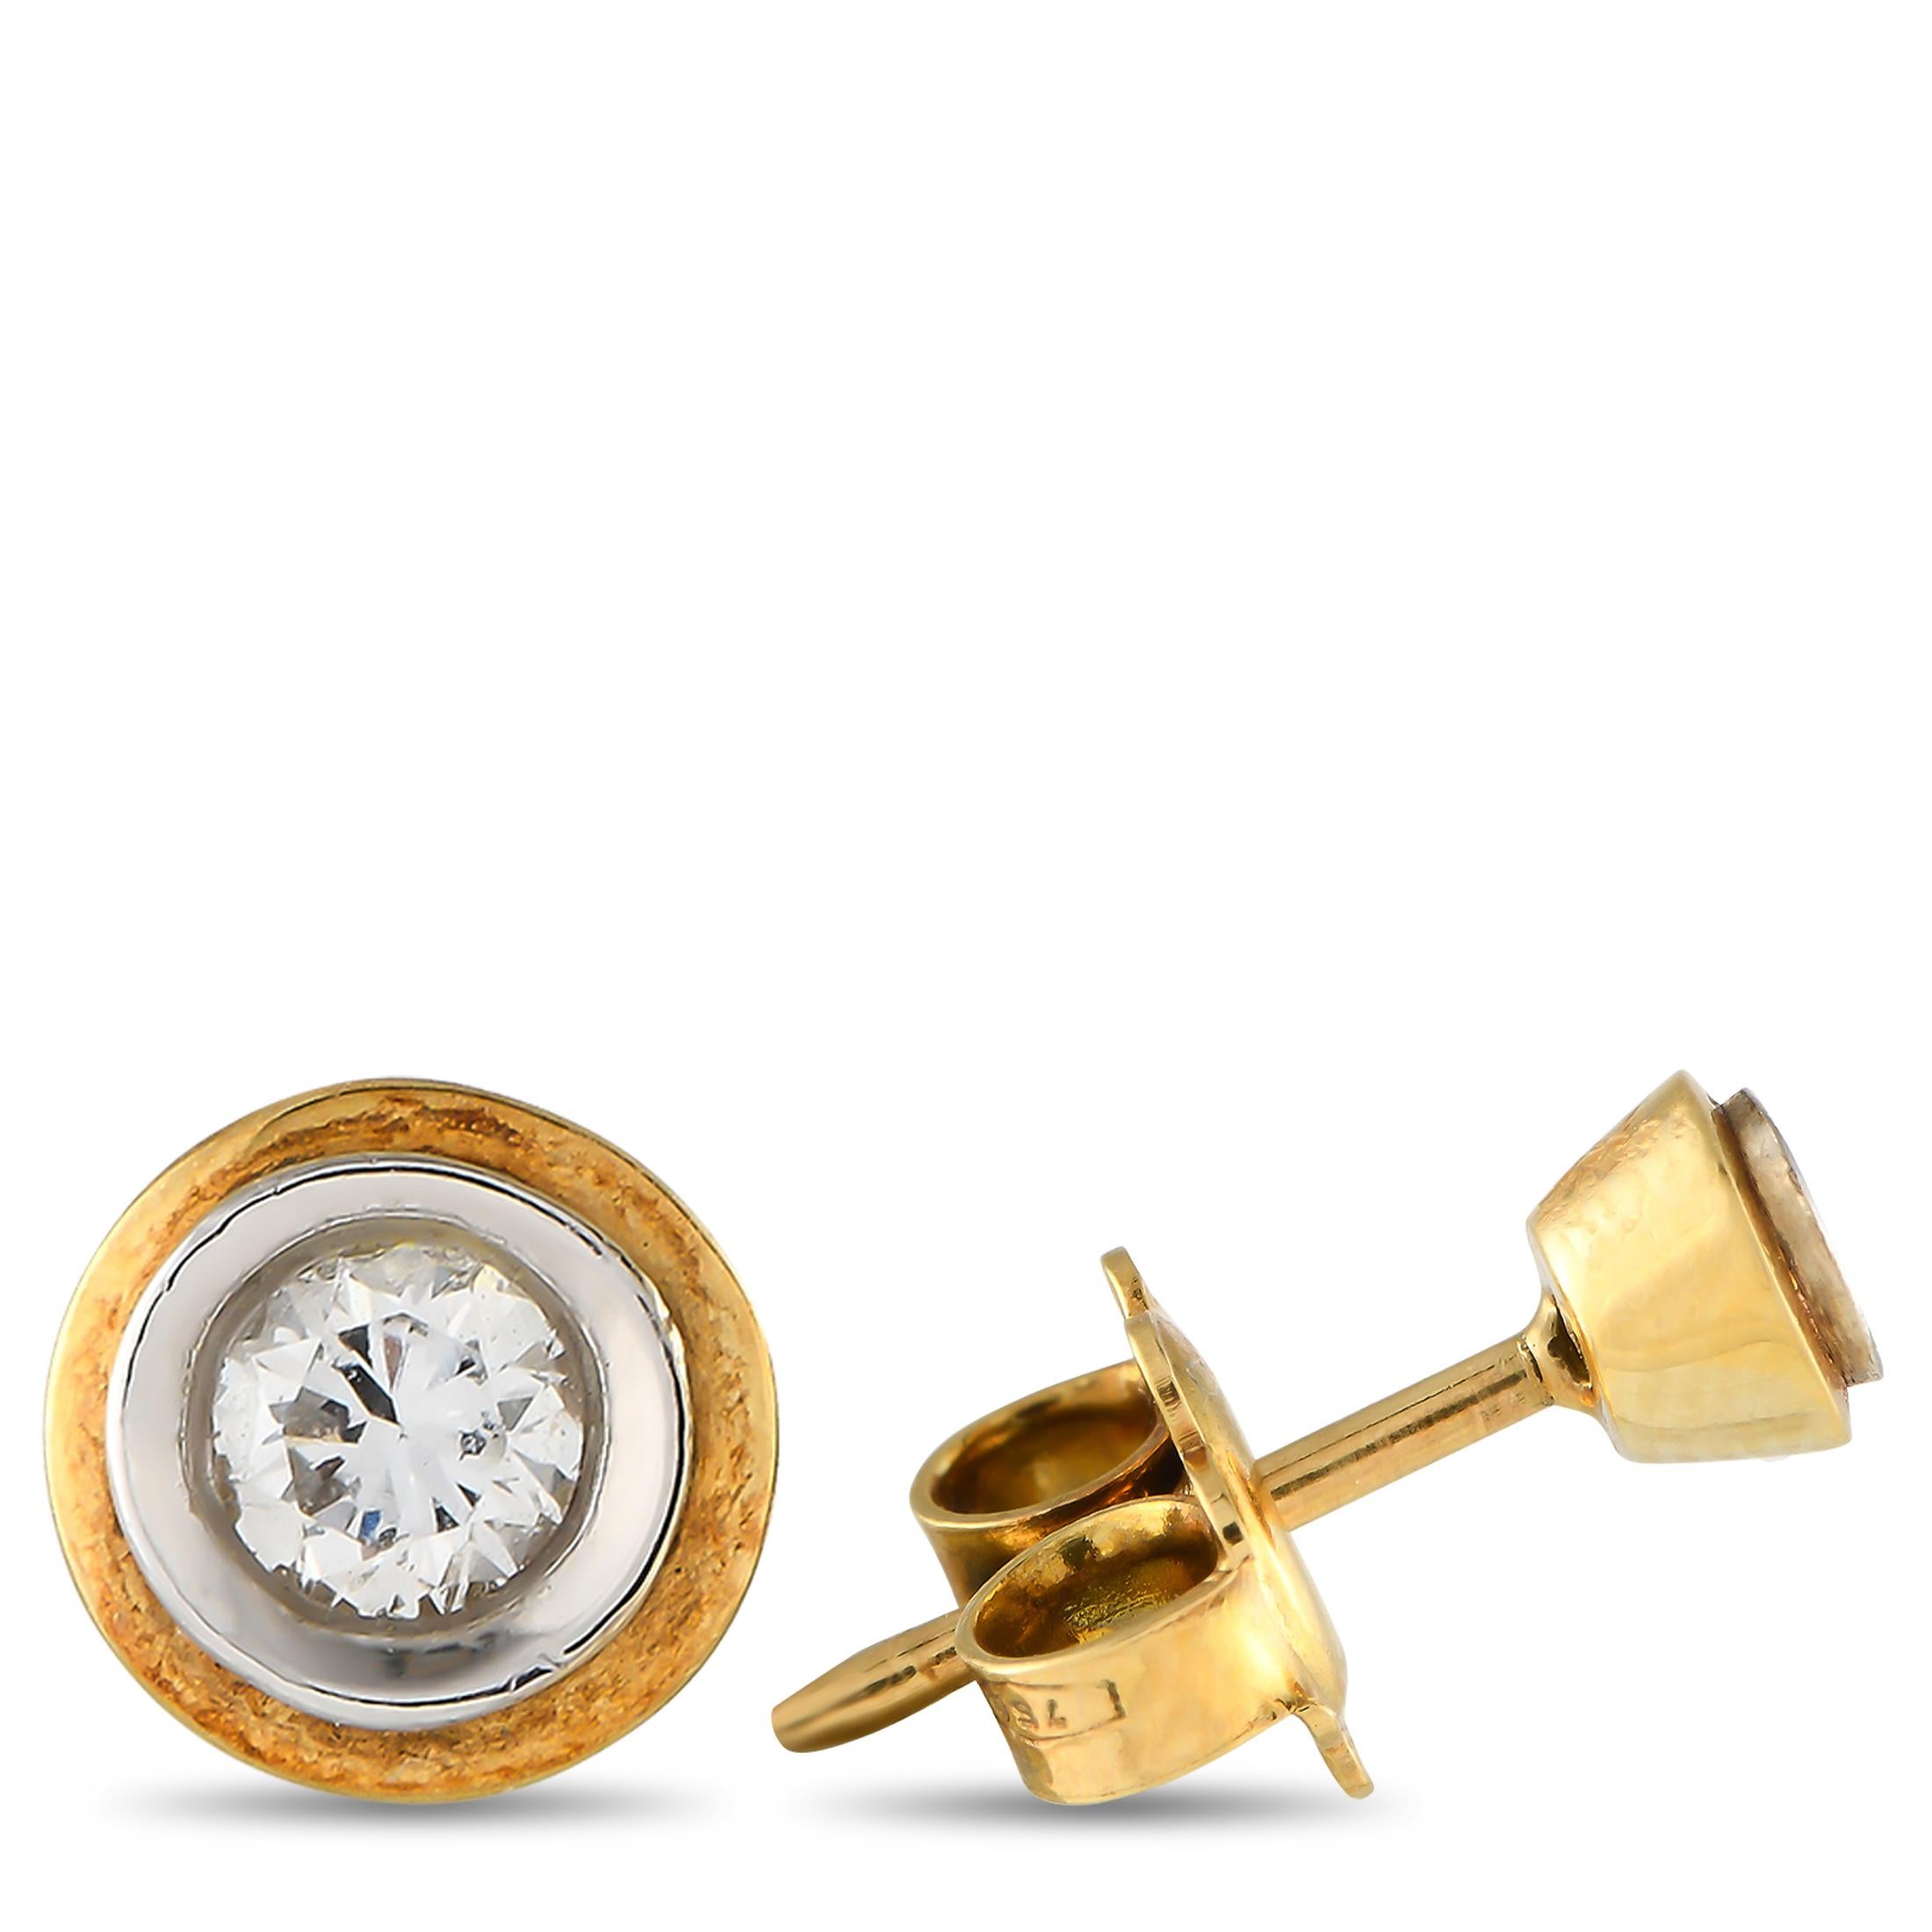 Sparkling round-cut Diamonds totaling 0.12 carats in a classic bezel setting make these stud earrings simply timeless. Each one features a 14K Yellow Gold setting and measures 0.20 round.This jewelry piece is offered in brand new condition and